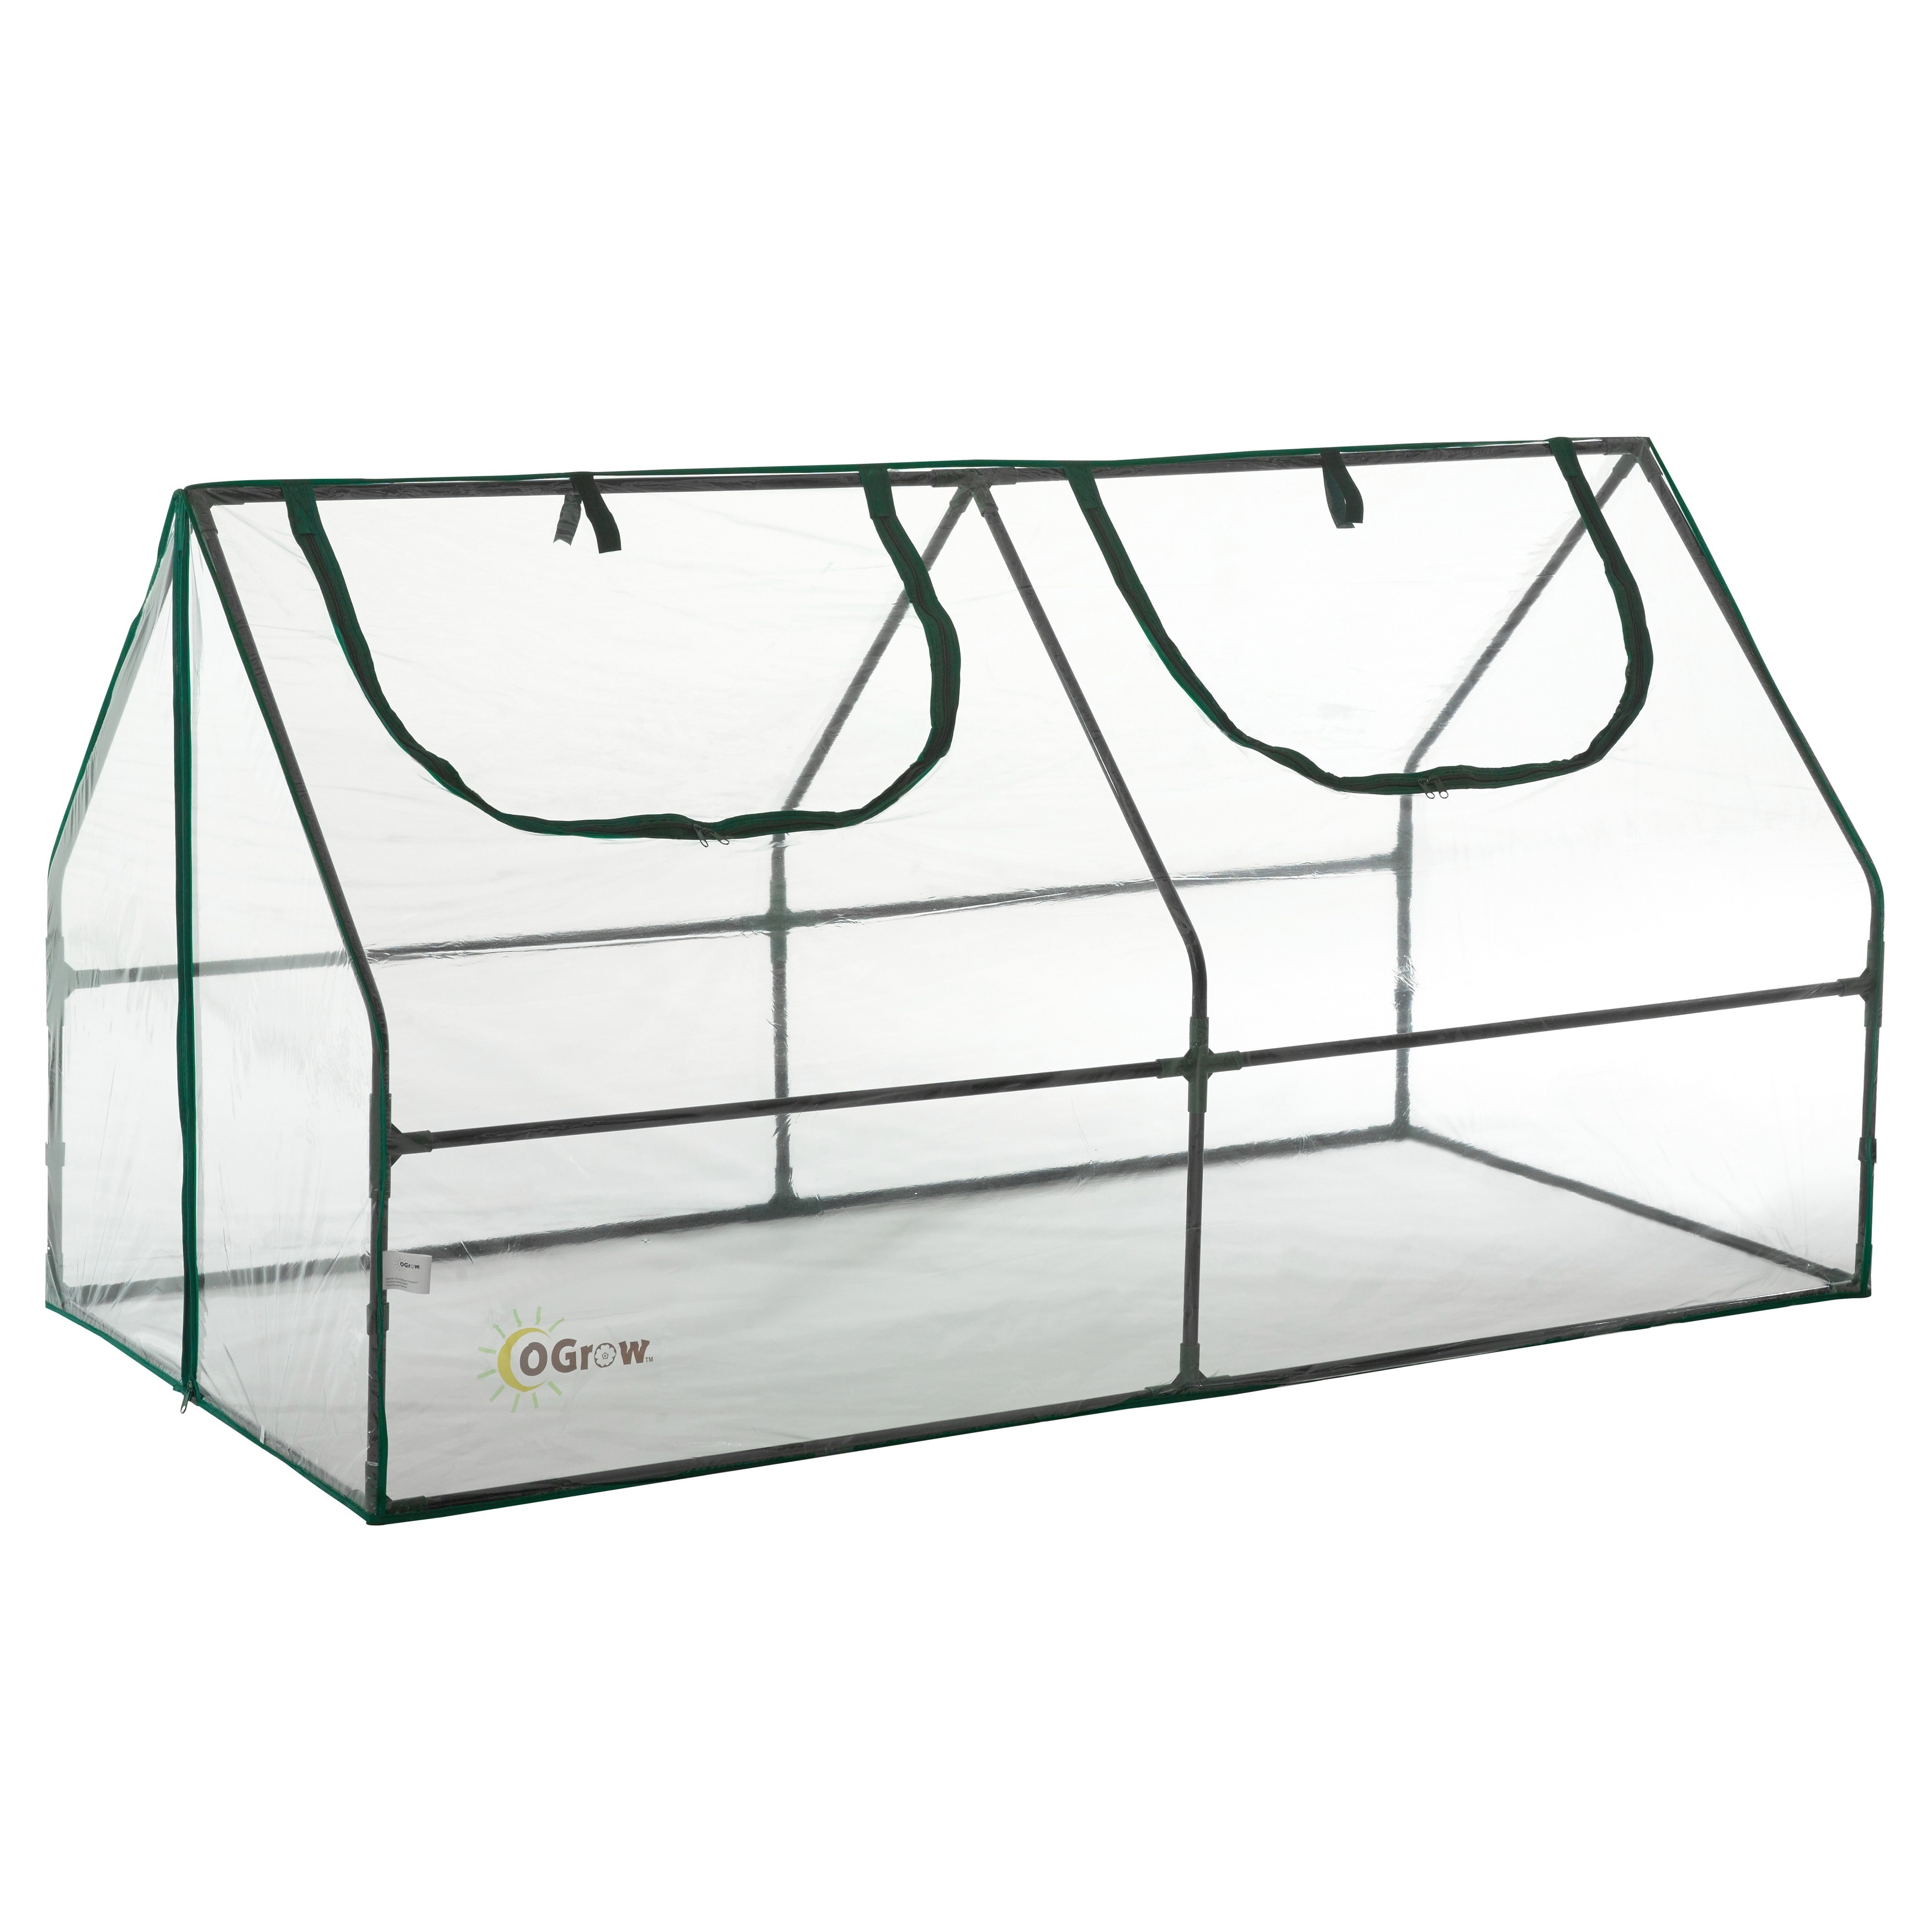 Ogrow Compact Outdoor Seed Starter Greenhouse Cloche